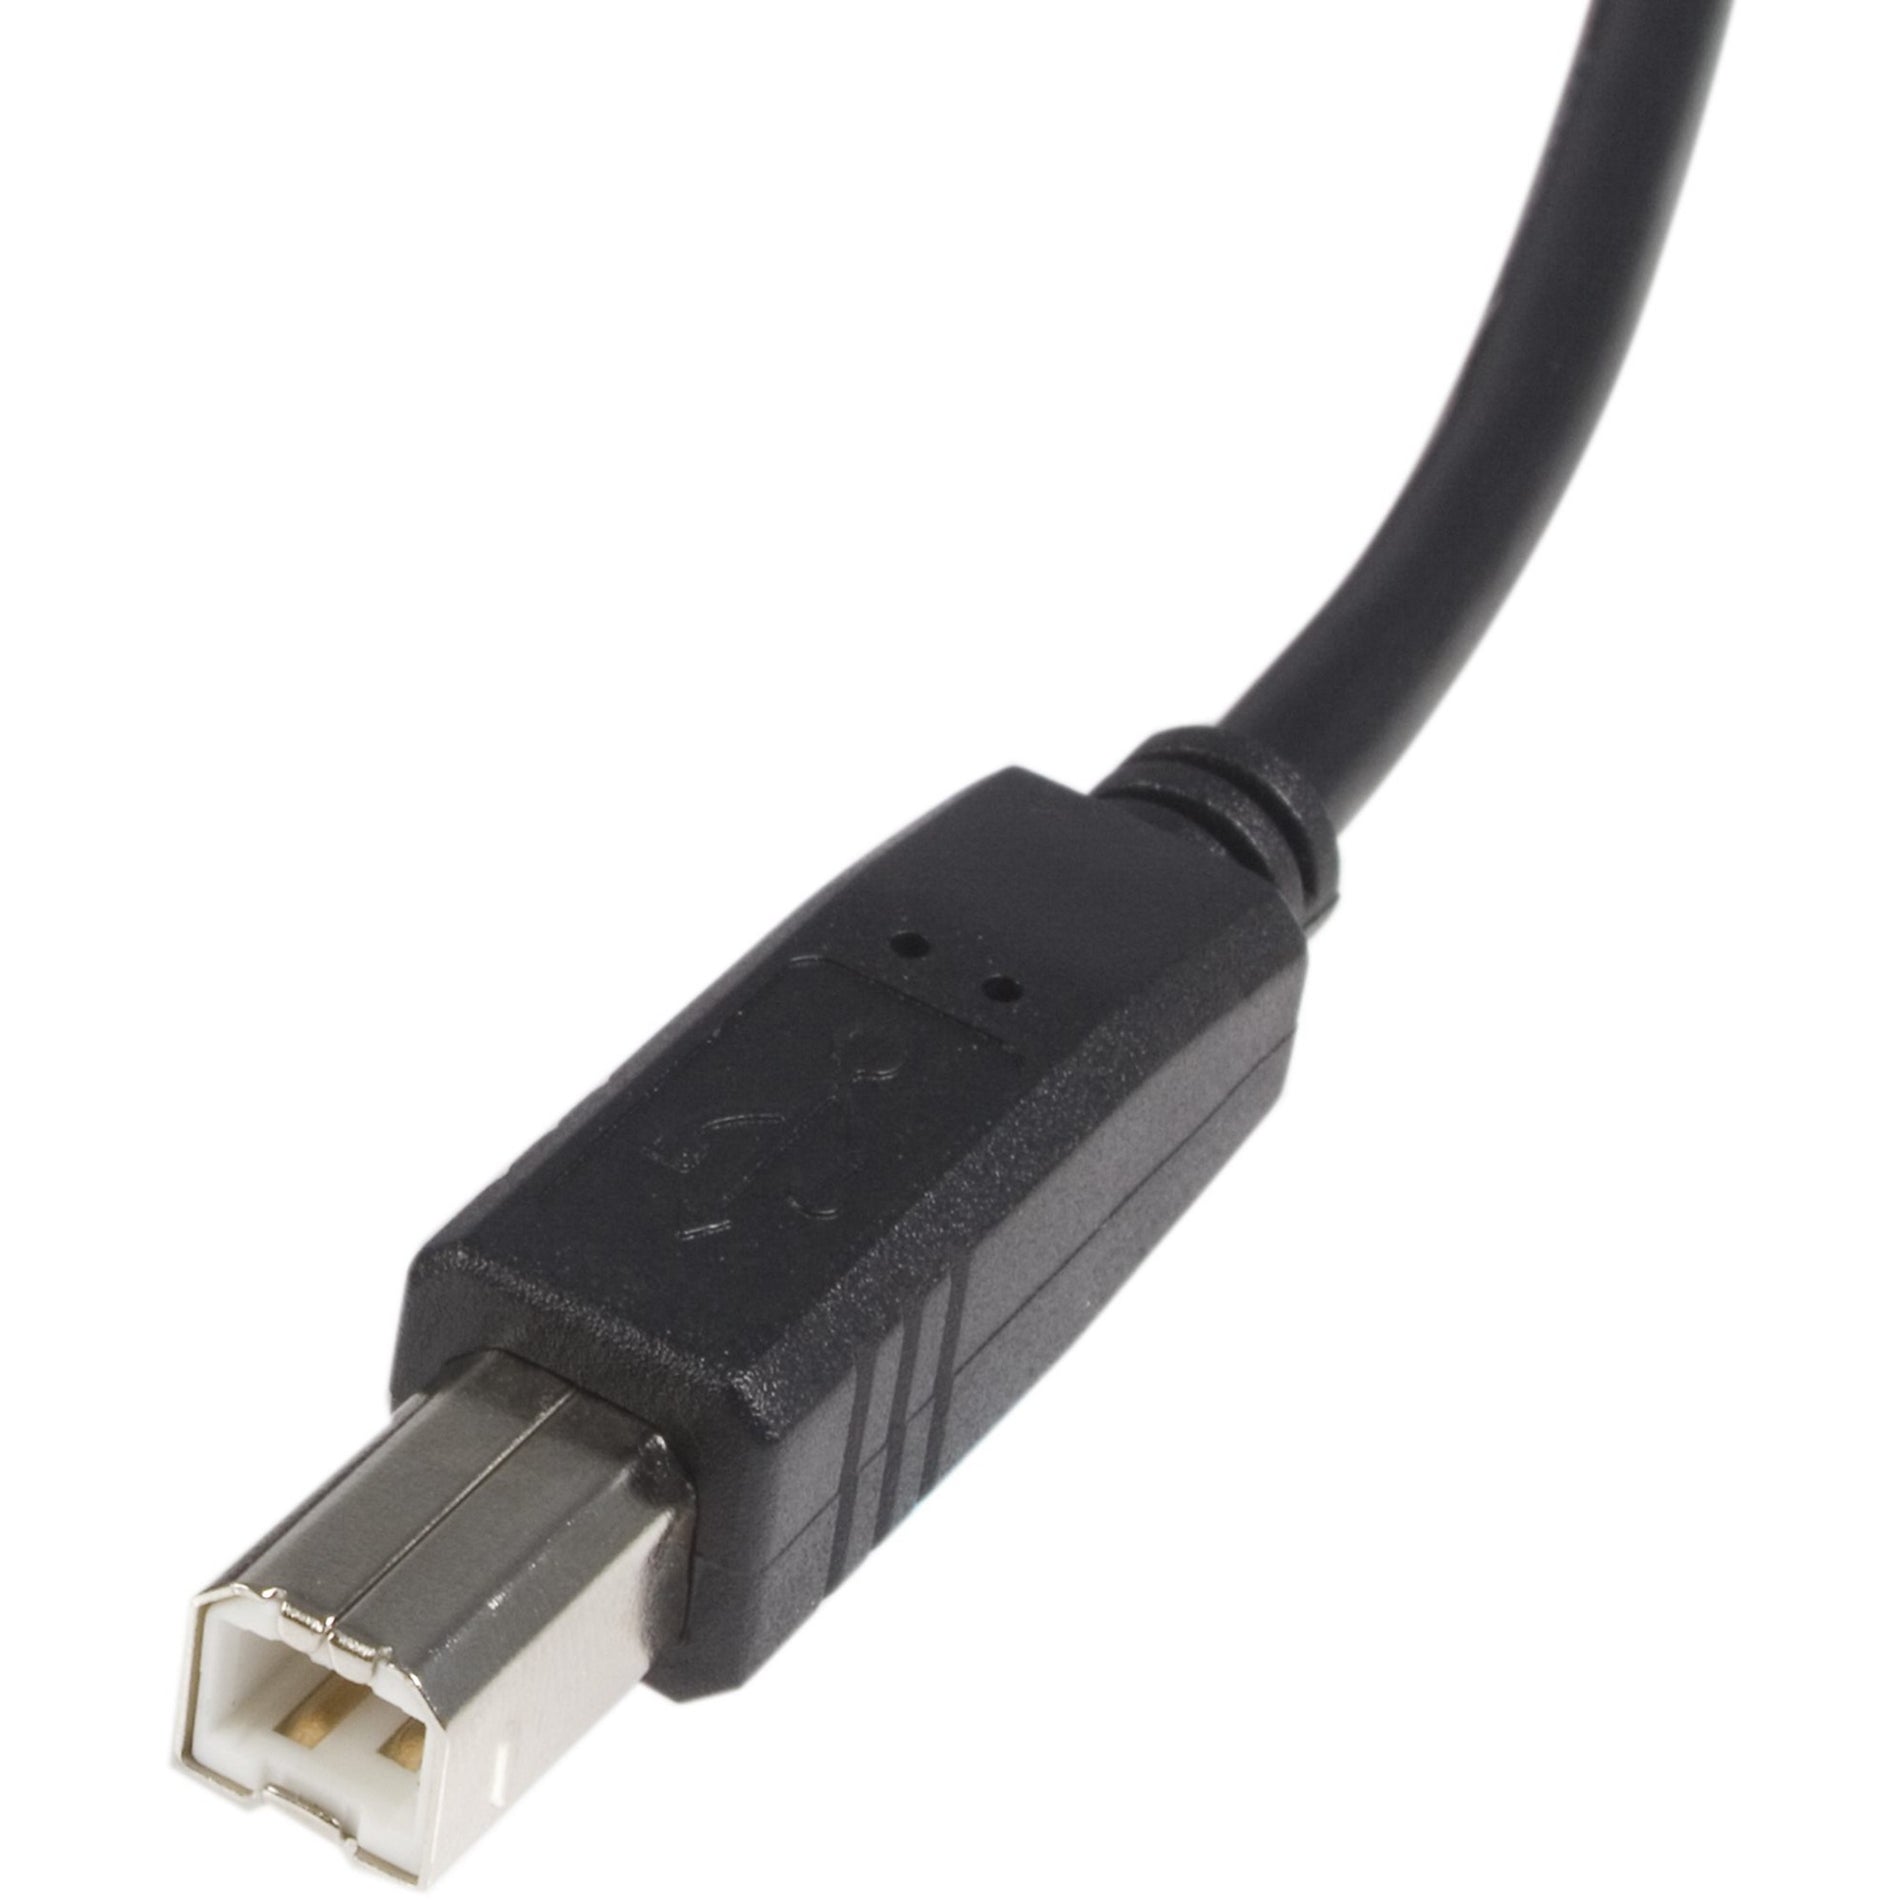 StarTech.com USB2HAB15 15 ft USB 2.0 A to B Cable - M/M, High-Speed Data Transfer, Lifetime Warranty